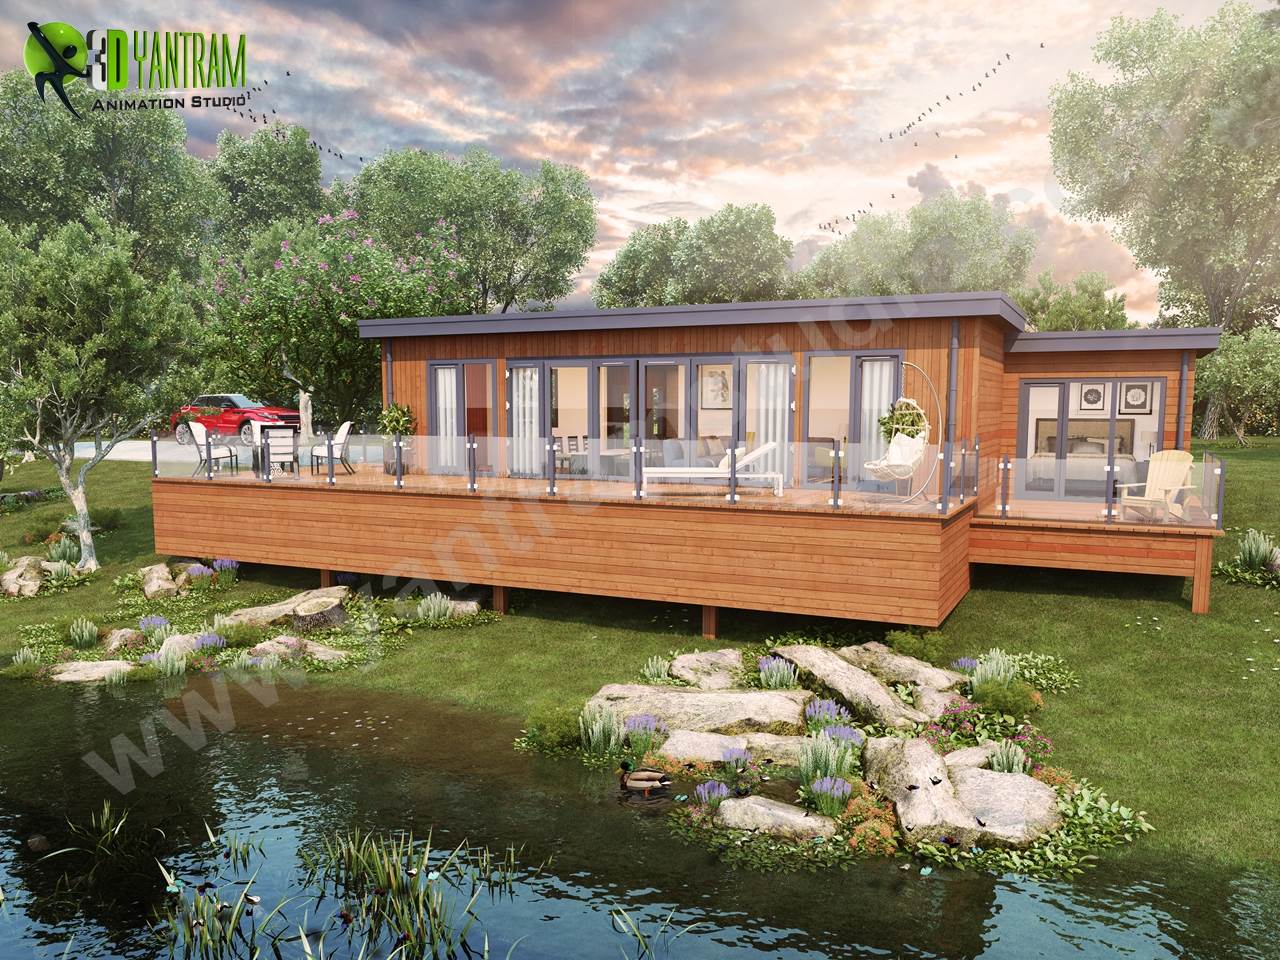 Lodge Architectural Rendering with Natural Landscape \x26 Pond \u2013 Creative ideas - Lodge Exterior Rendering with Natural Landscape & Pond - Creative ideas by Architectural Visualization Companies. visualization company, rendering service, 3d rendering, firms, visualization, photorealistic, designers, cgi architecture, 3d exterior house  by Yantramarchitecturaldesignstudio